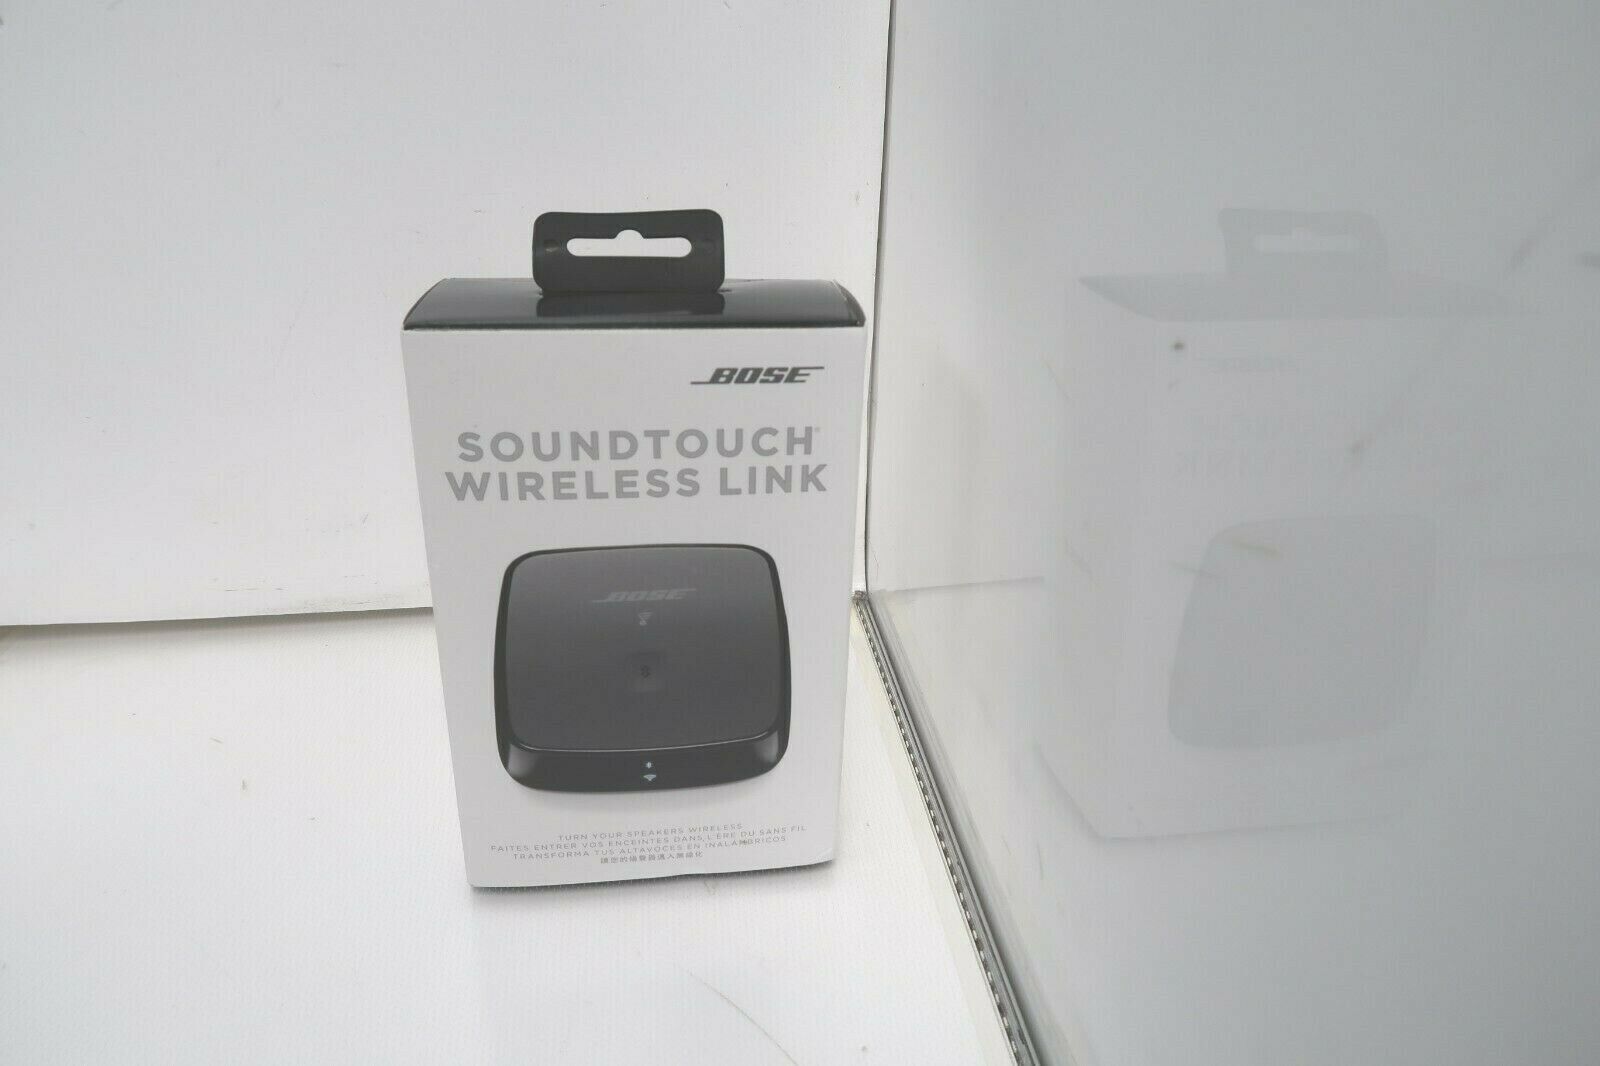 Bose SoundTouch Wireless Link Adapter for Sale - Celebrity Cars Blog